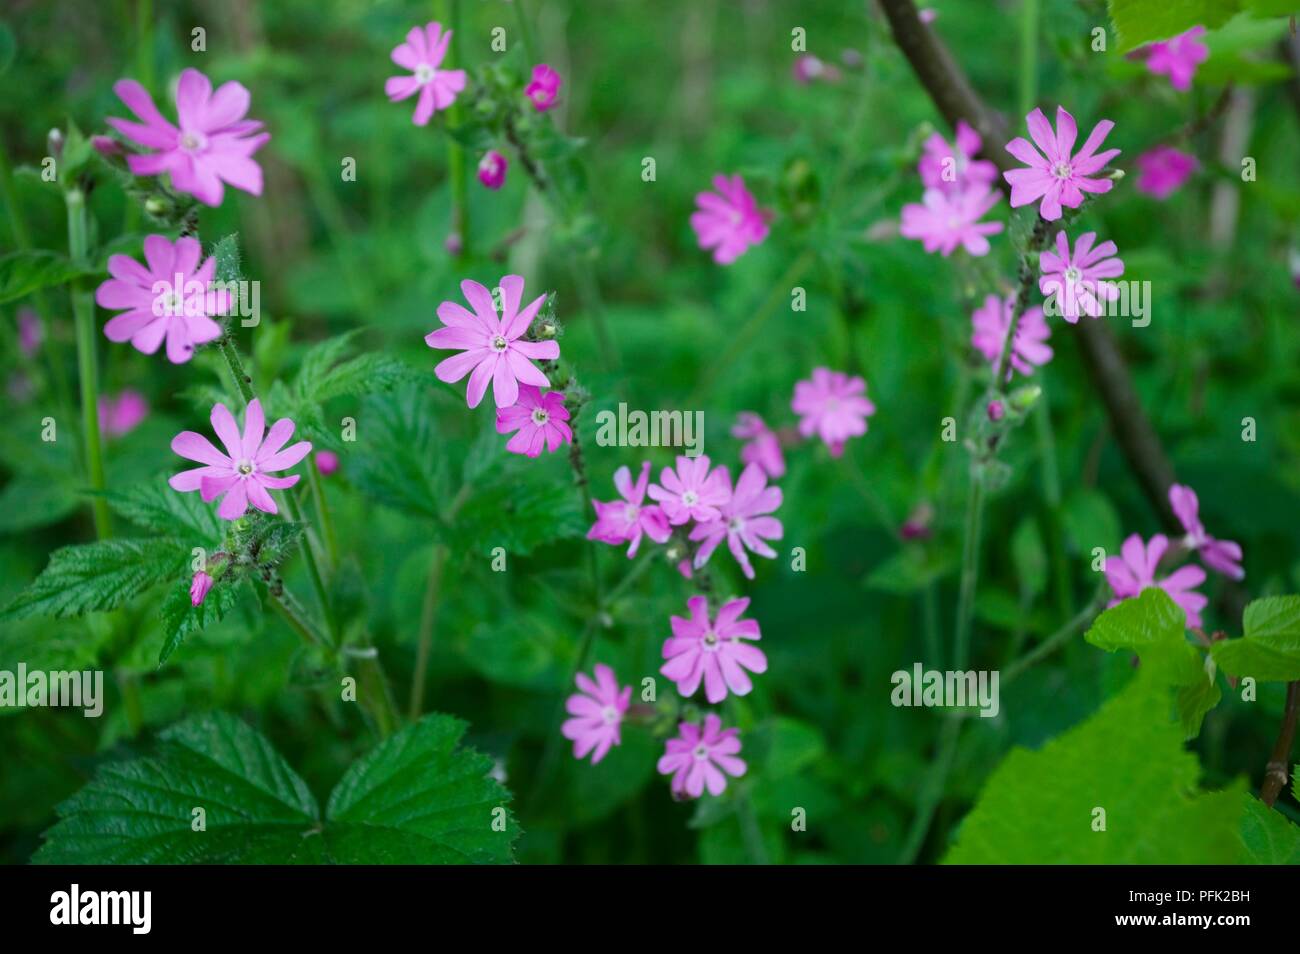 Silene dioica (Red campion), purple wildflowers, close-up Stock Photo